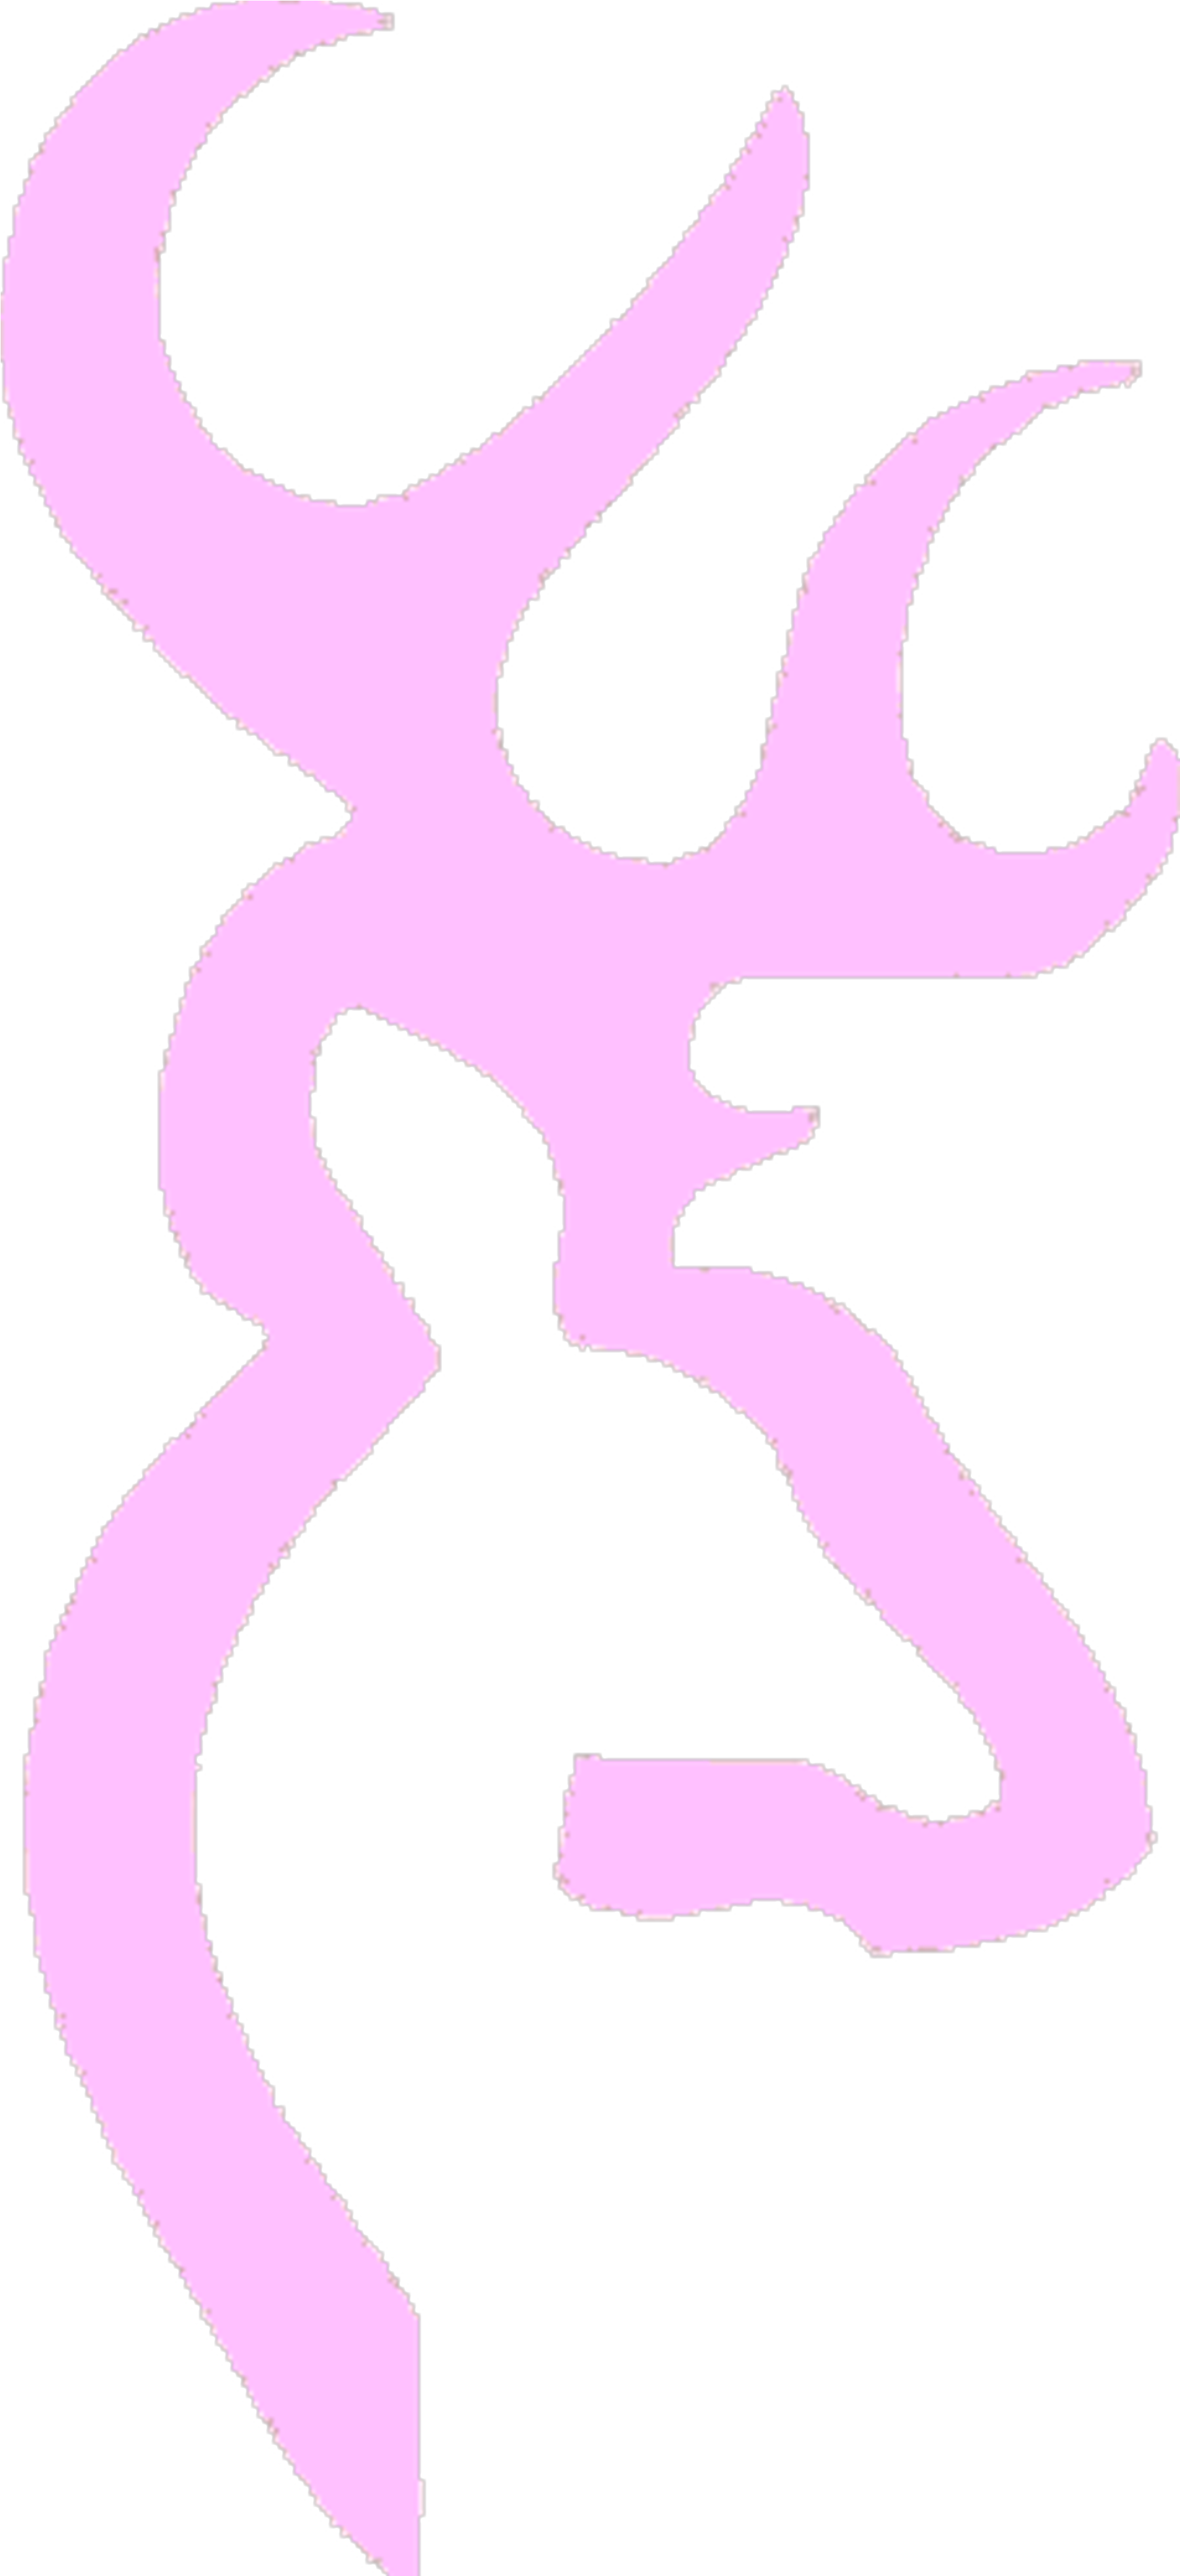 Pink Deer Image - Deer Family Stickers For Car (2006x3949)